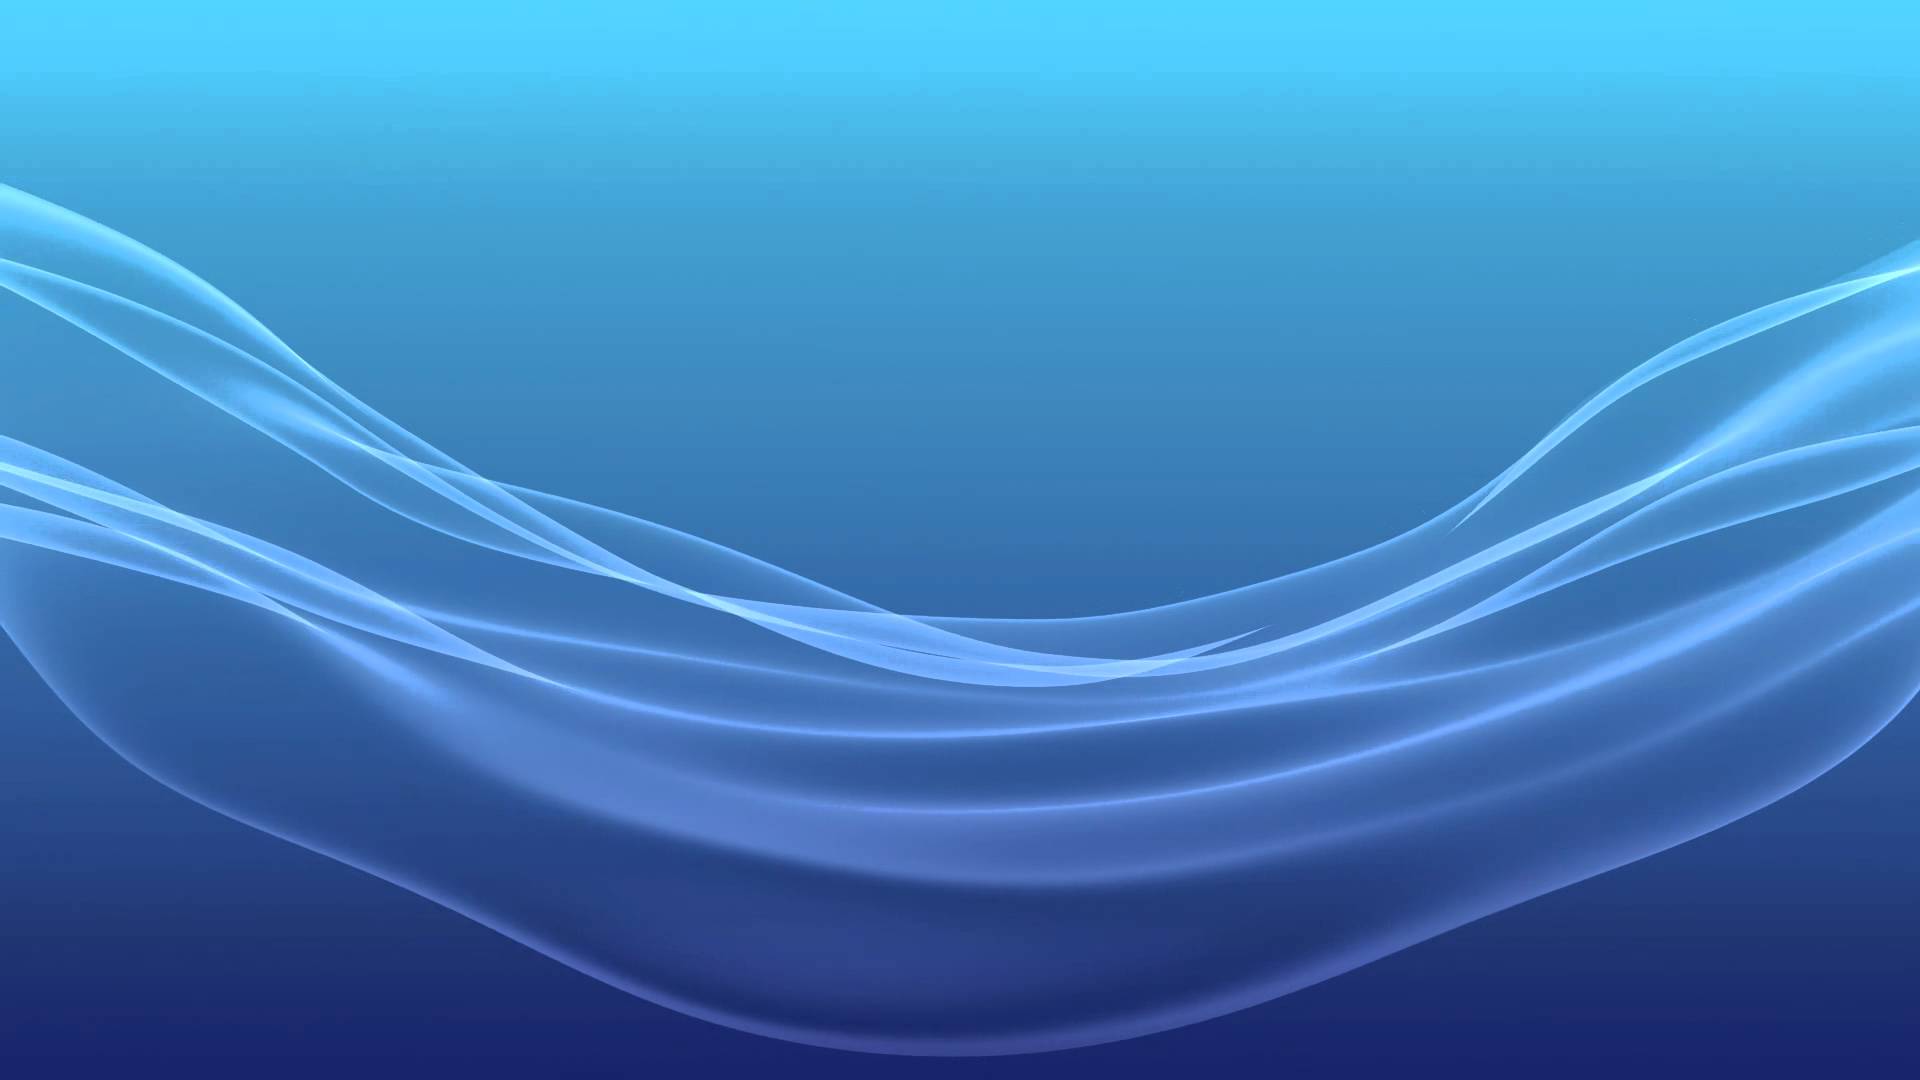 PS3 Background Waves Attempt HD